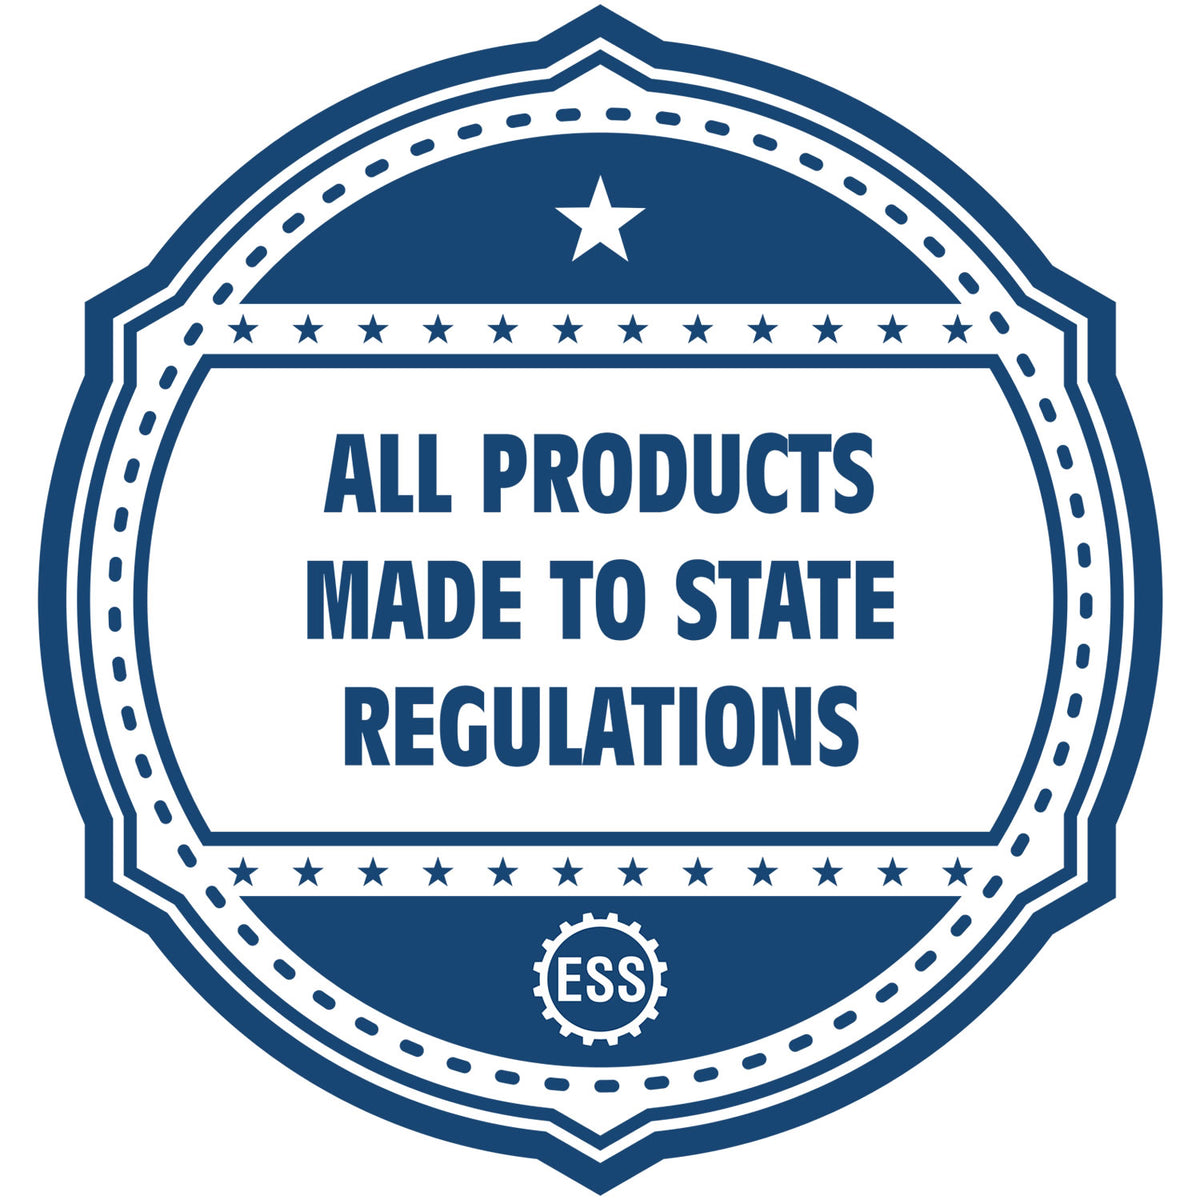 An icon or badge element for the Digital North Carolina Landscape Architect Stamp showing that this product is made in compliance with state regulations.